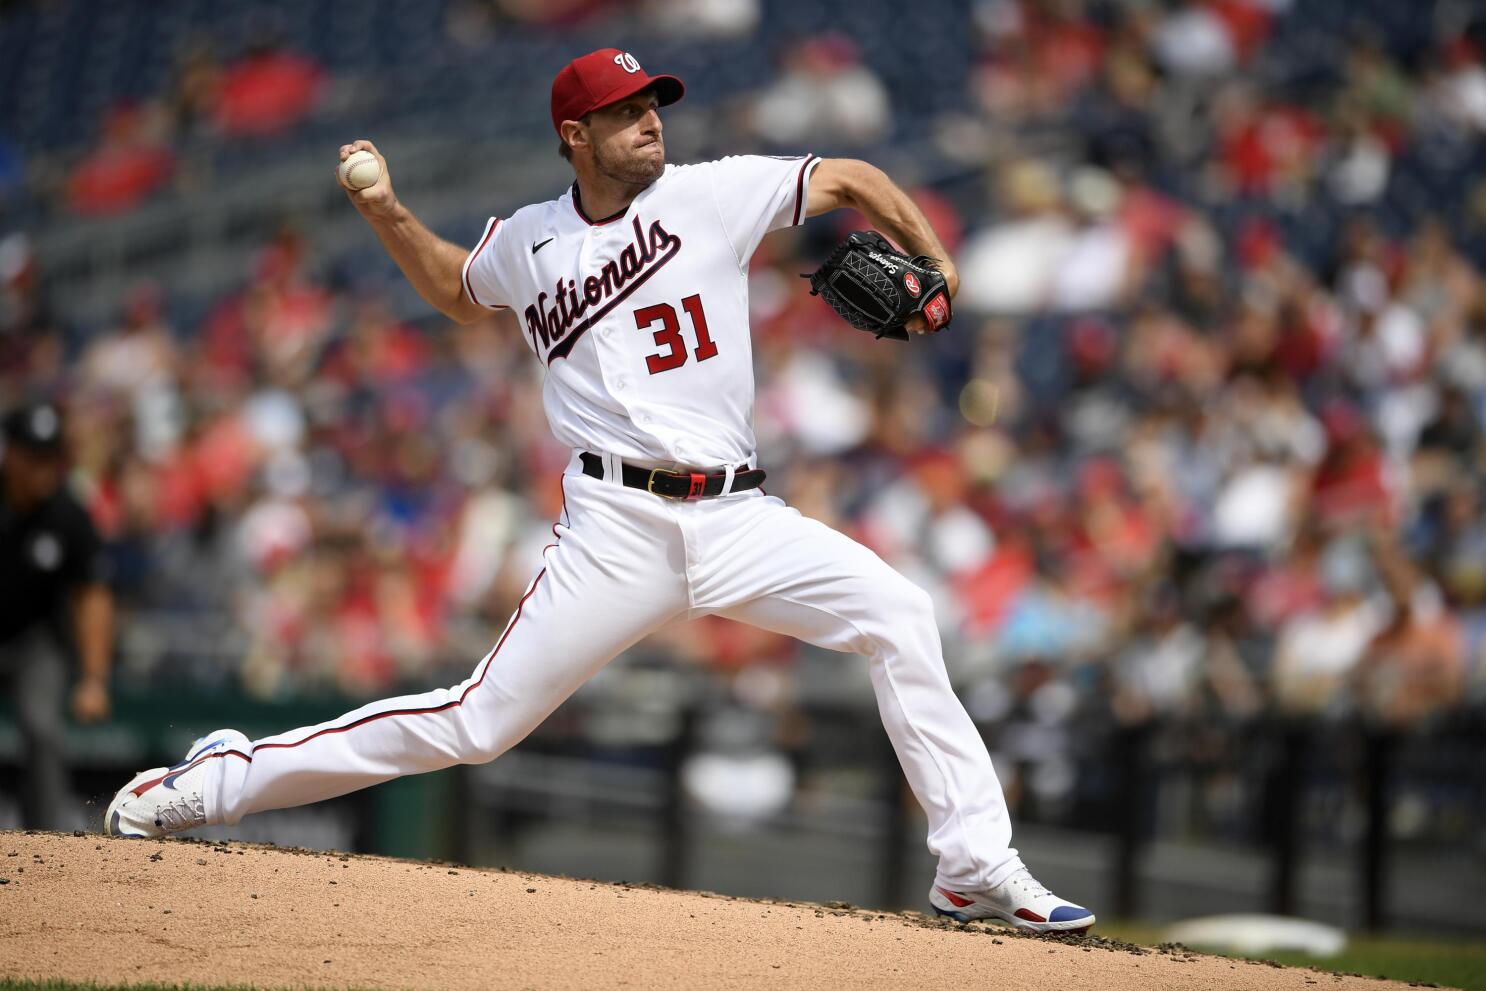 Report: Nats may listen to trade offers for Scherzer